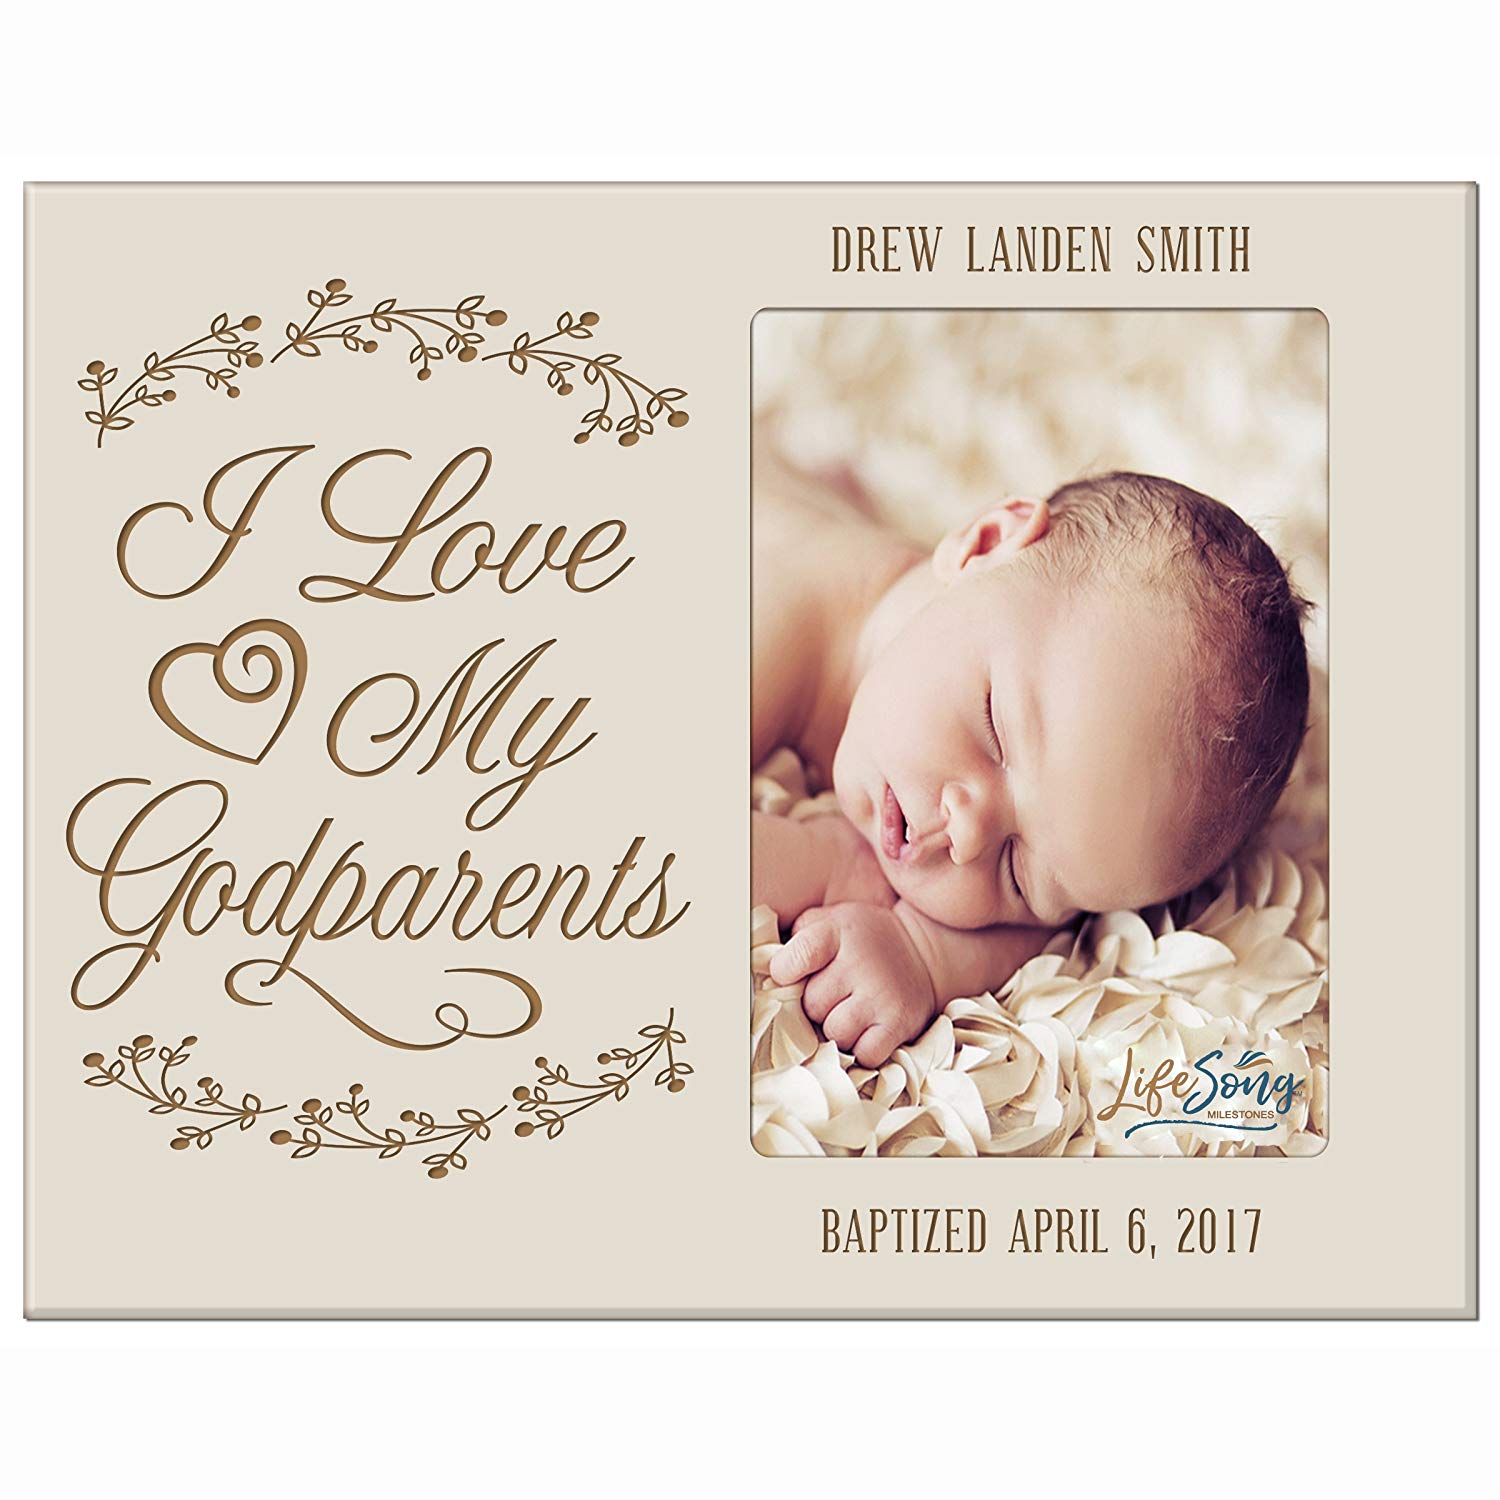 Personalized Godparents Gift Photo Frame - I Love My Grandparents - LifeSong Milestones